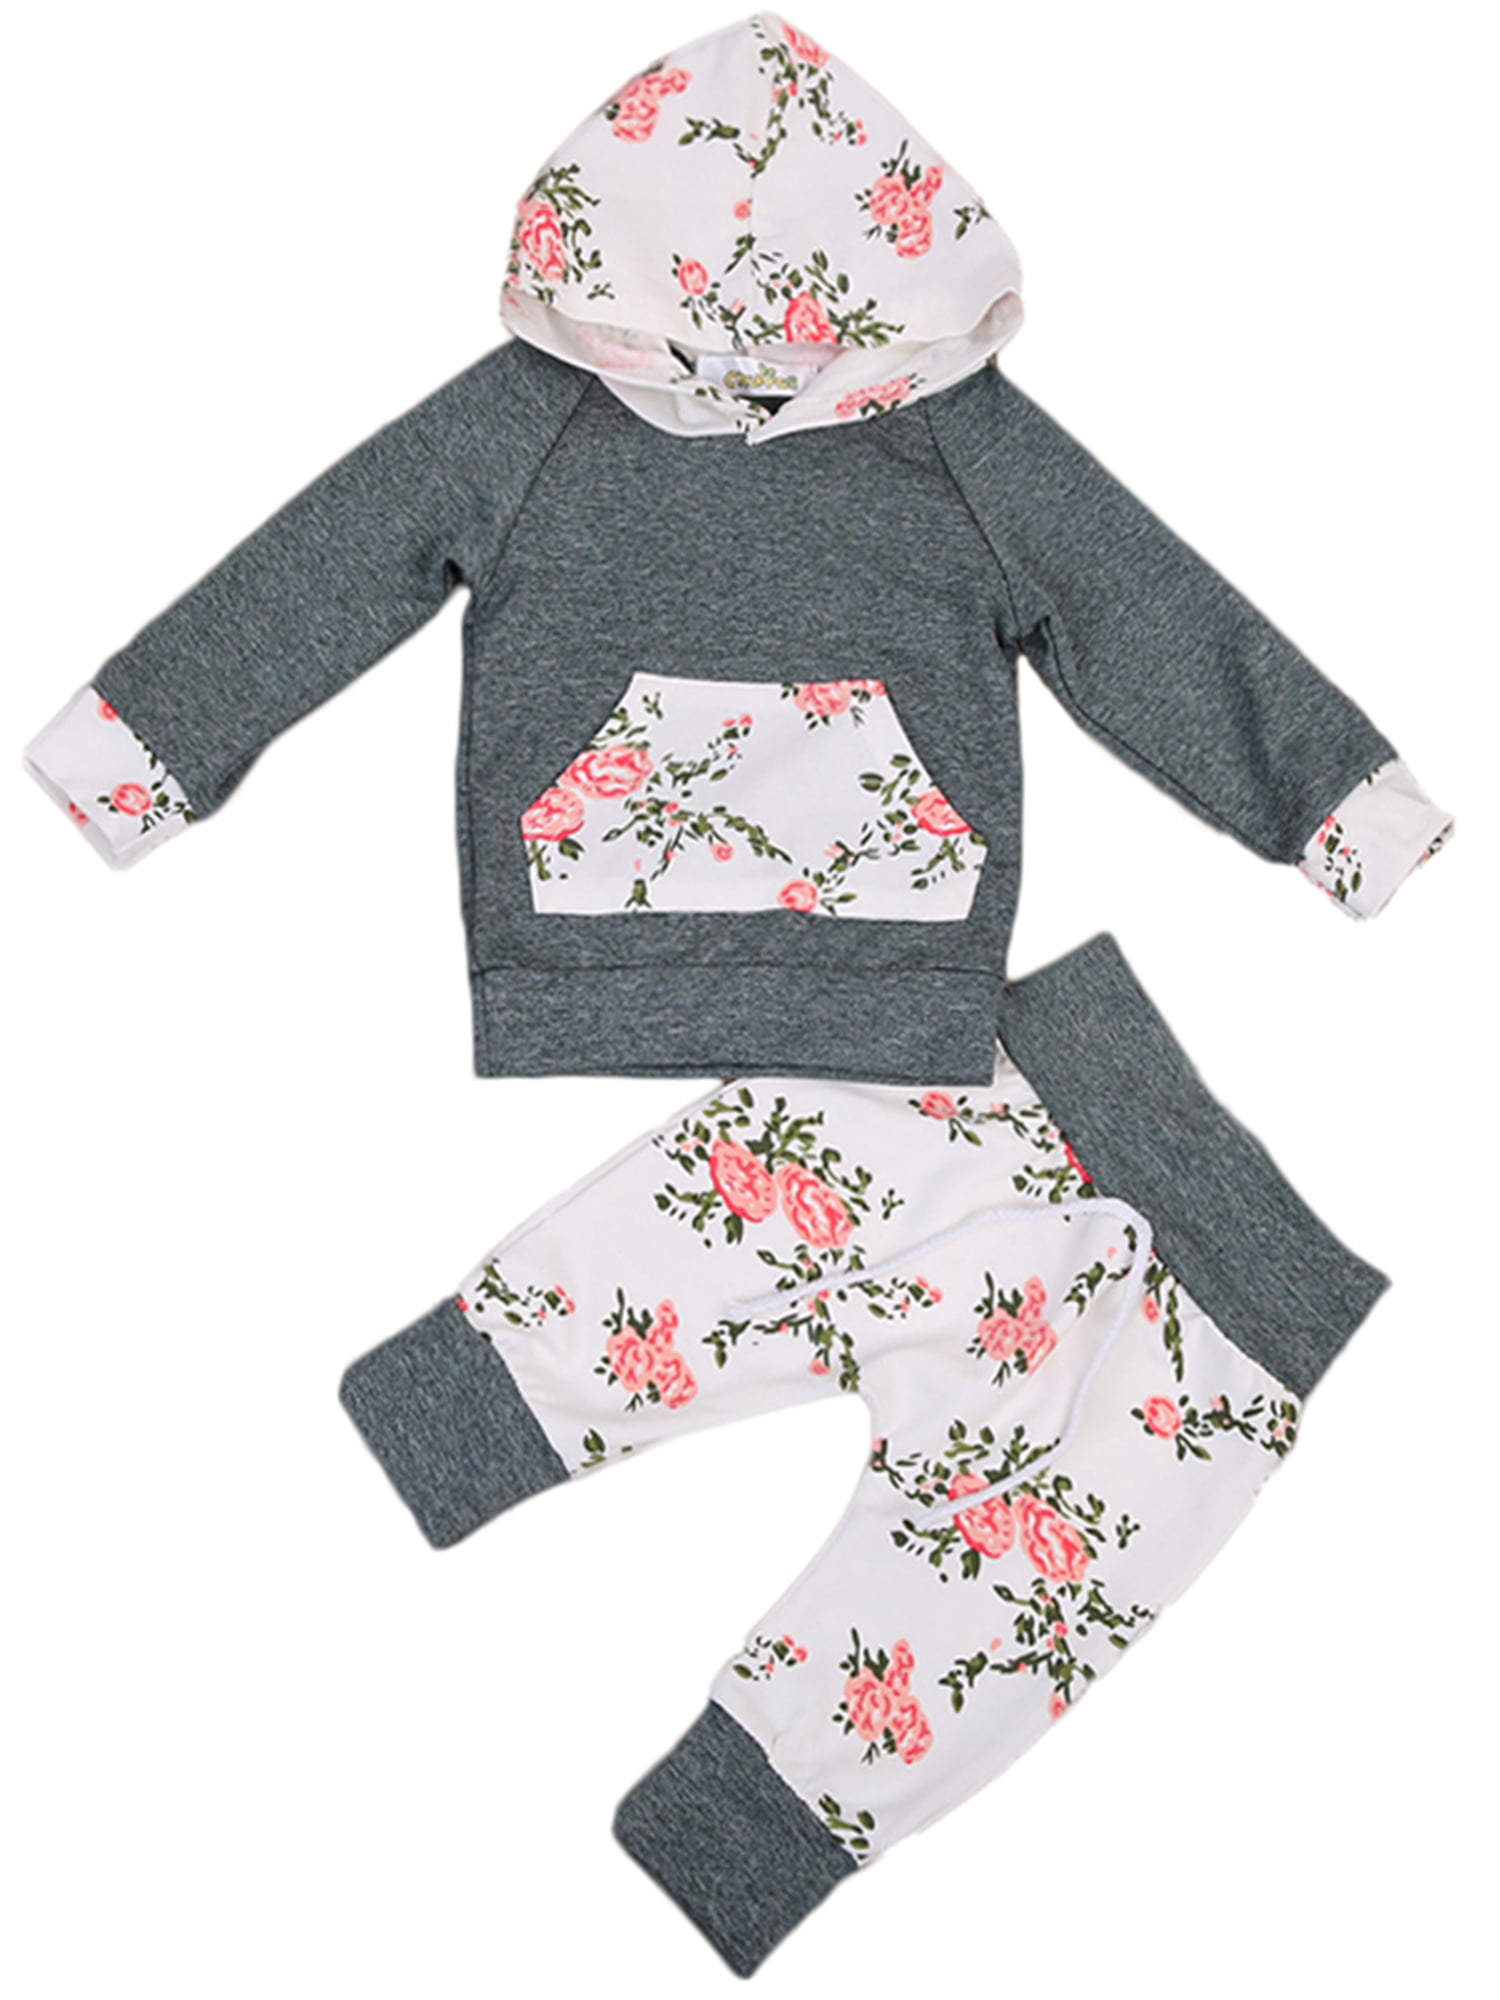 2pcs Toddler Infant Baby Boy Girl Clothes Set Floral Hoodie Tops+Pants Outfits